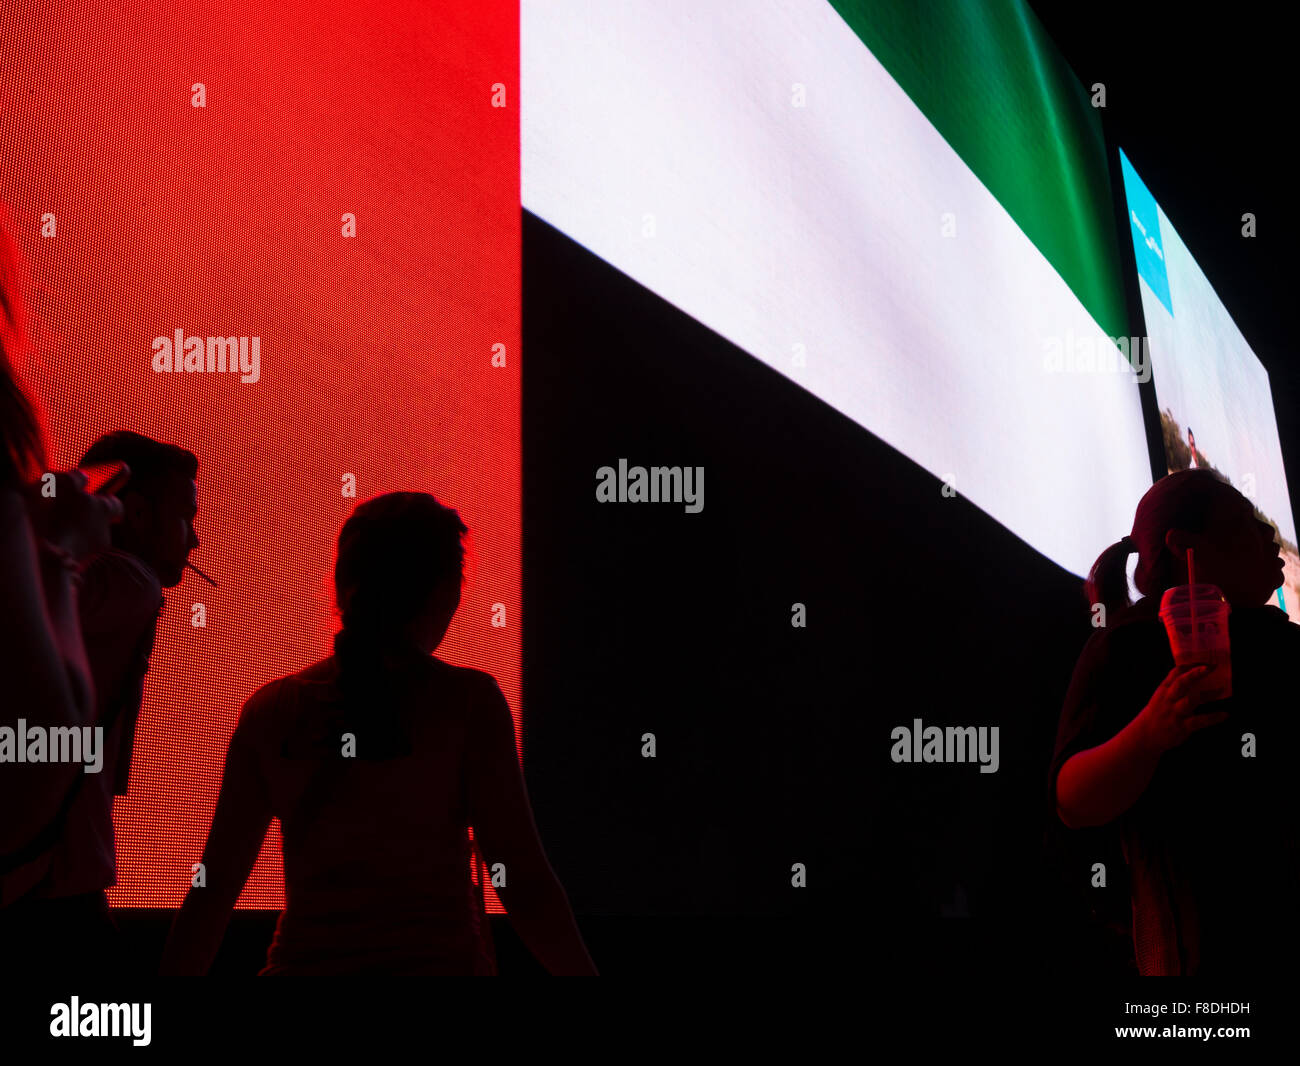 Silhouette of people in front of giant UAE (United Arab Emirates) flag in Dubai Mall. Stock Photo